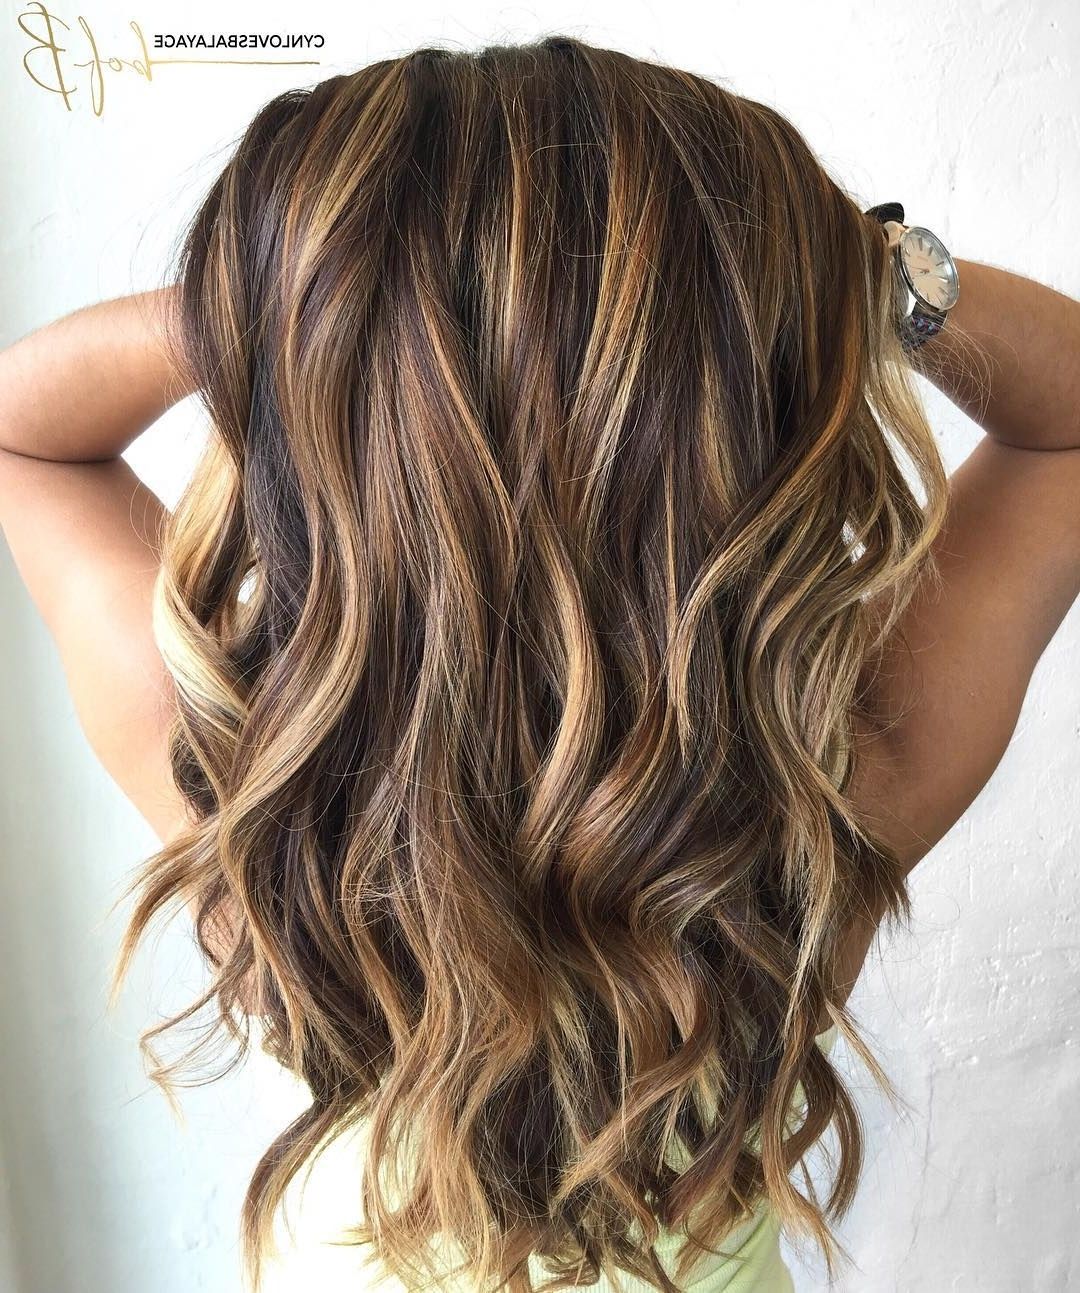 Most Current Dark Locks Blonde Hairstyles With Caramel Highlights In 60 Looks With Caramel Highlights On Brown And Dark Brown Hair (View 4 of 20)